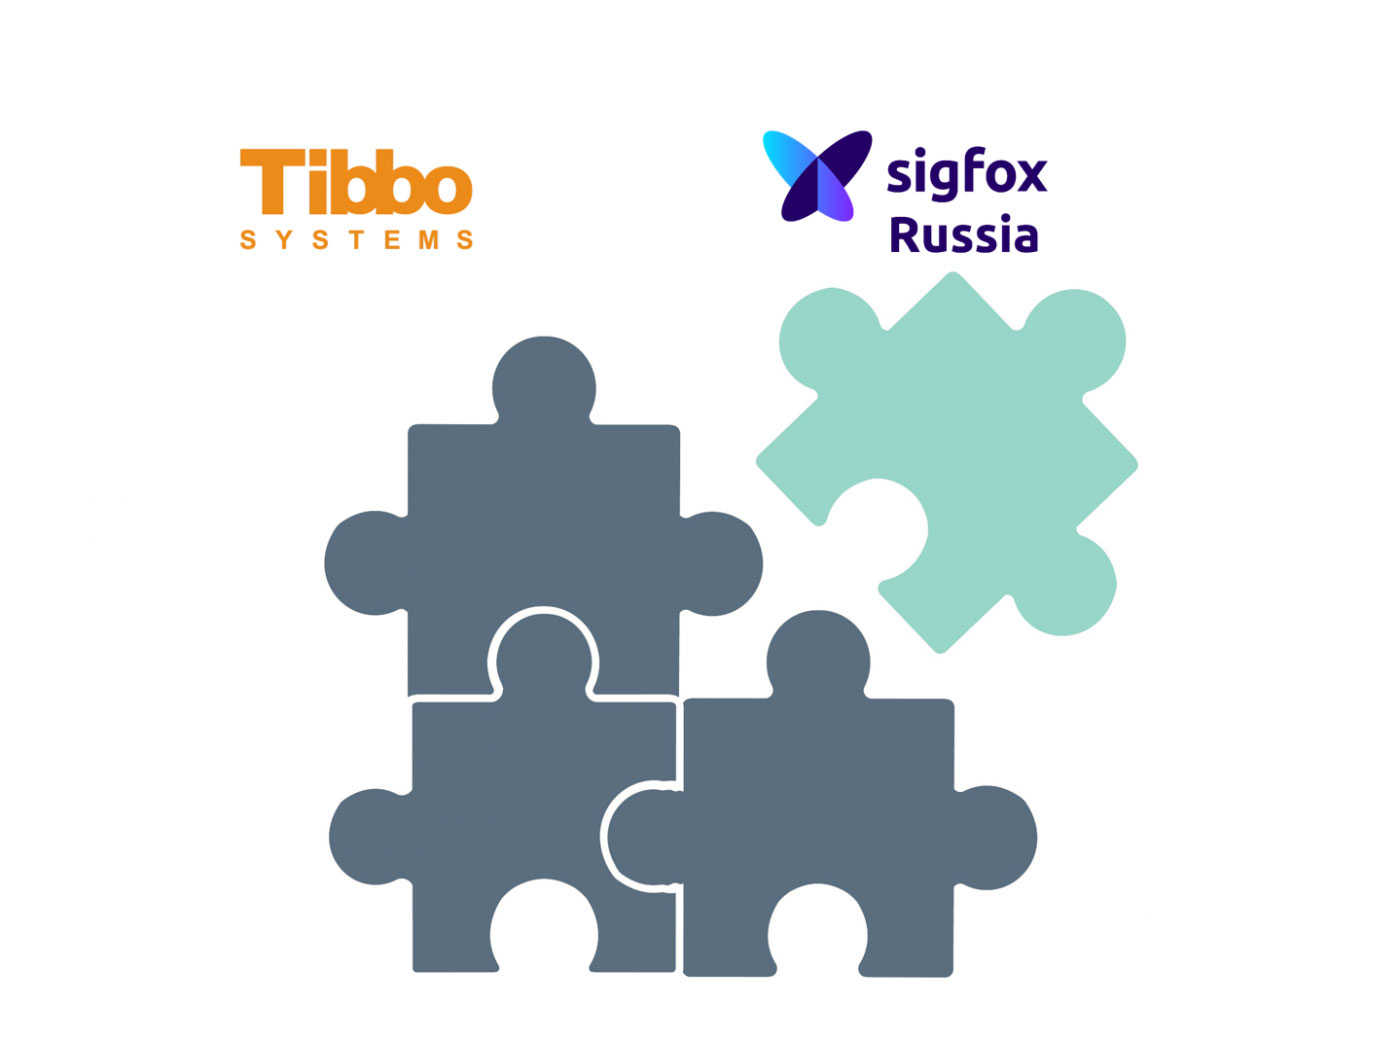 sigfox russia partners with tibbo systems